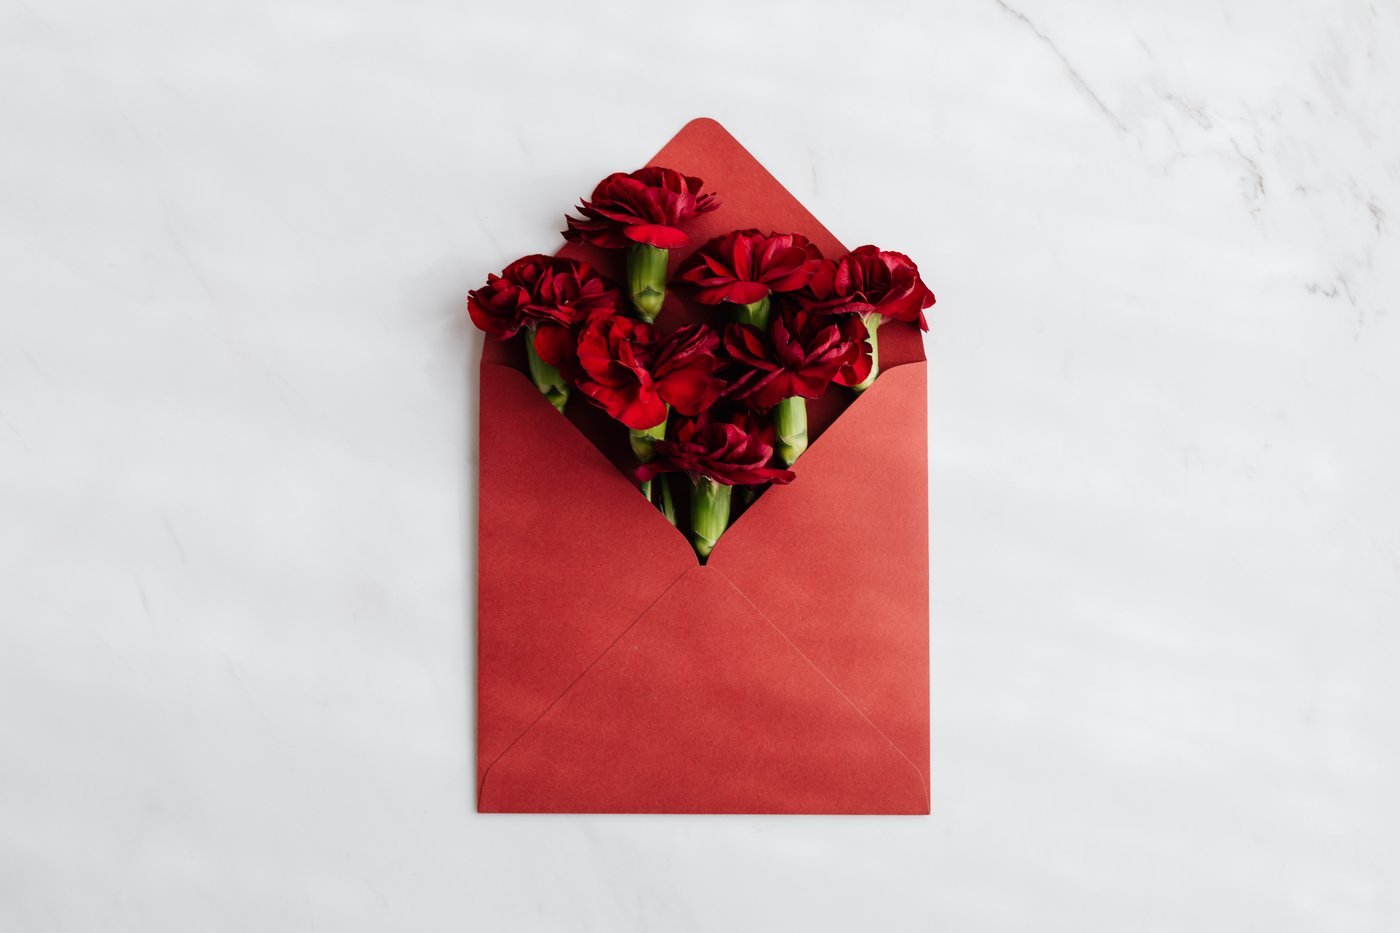 red envelope with red carnations inside - what flowers to get for each anniversary